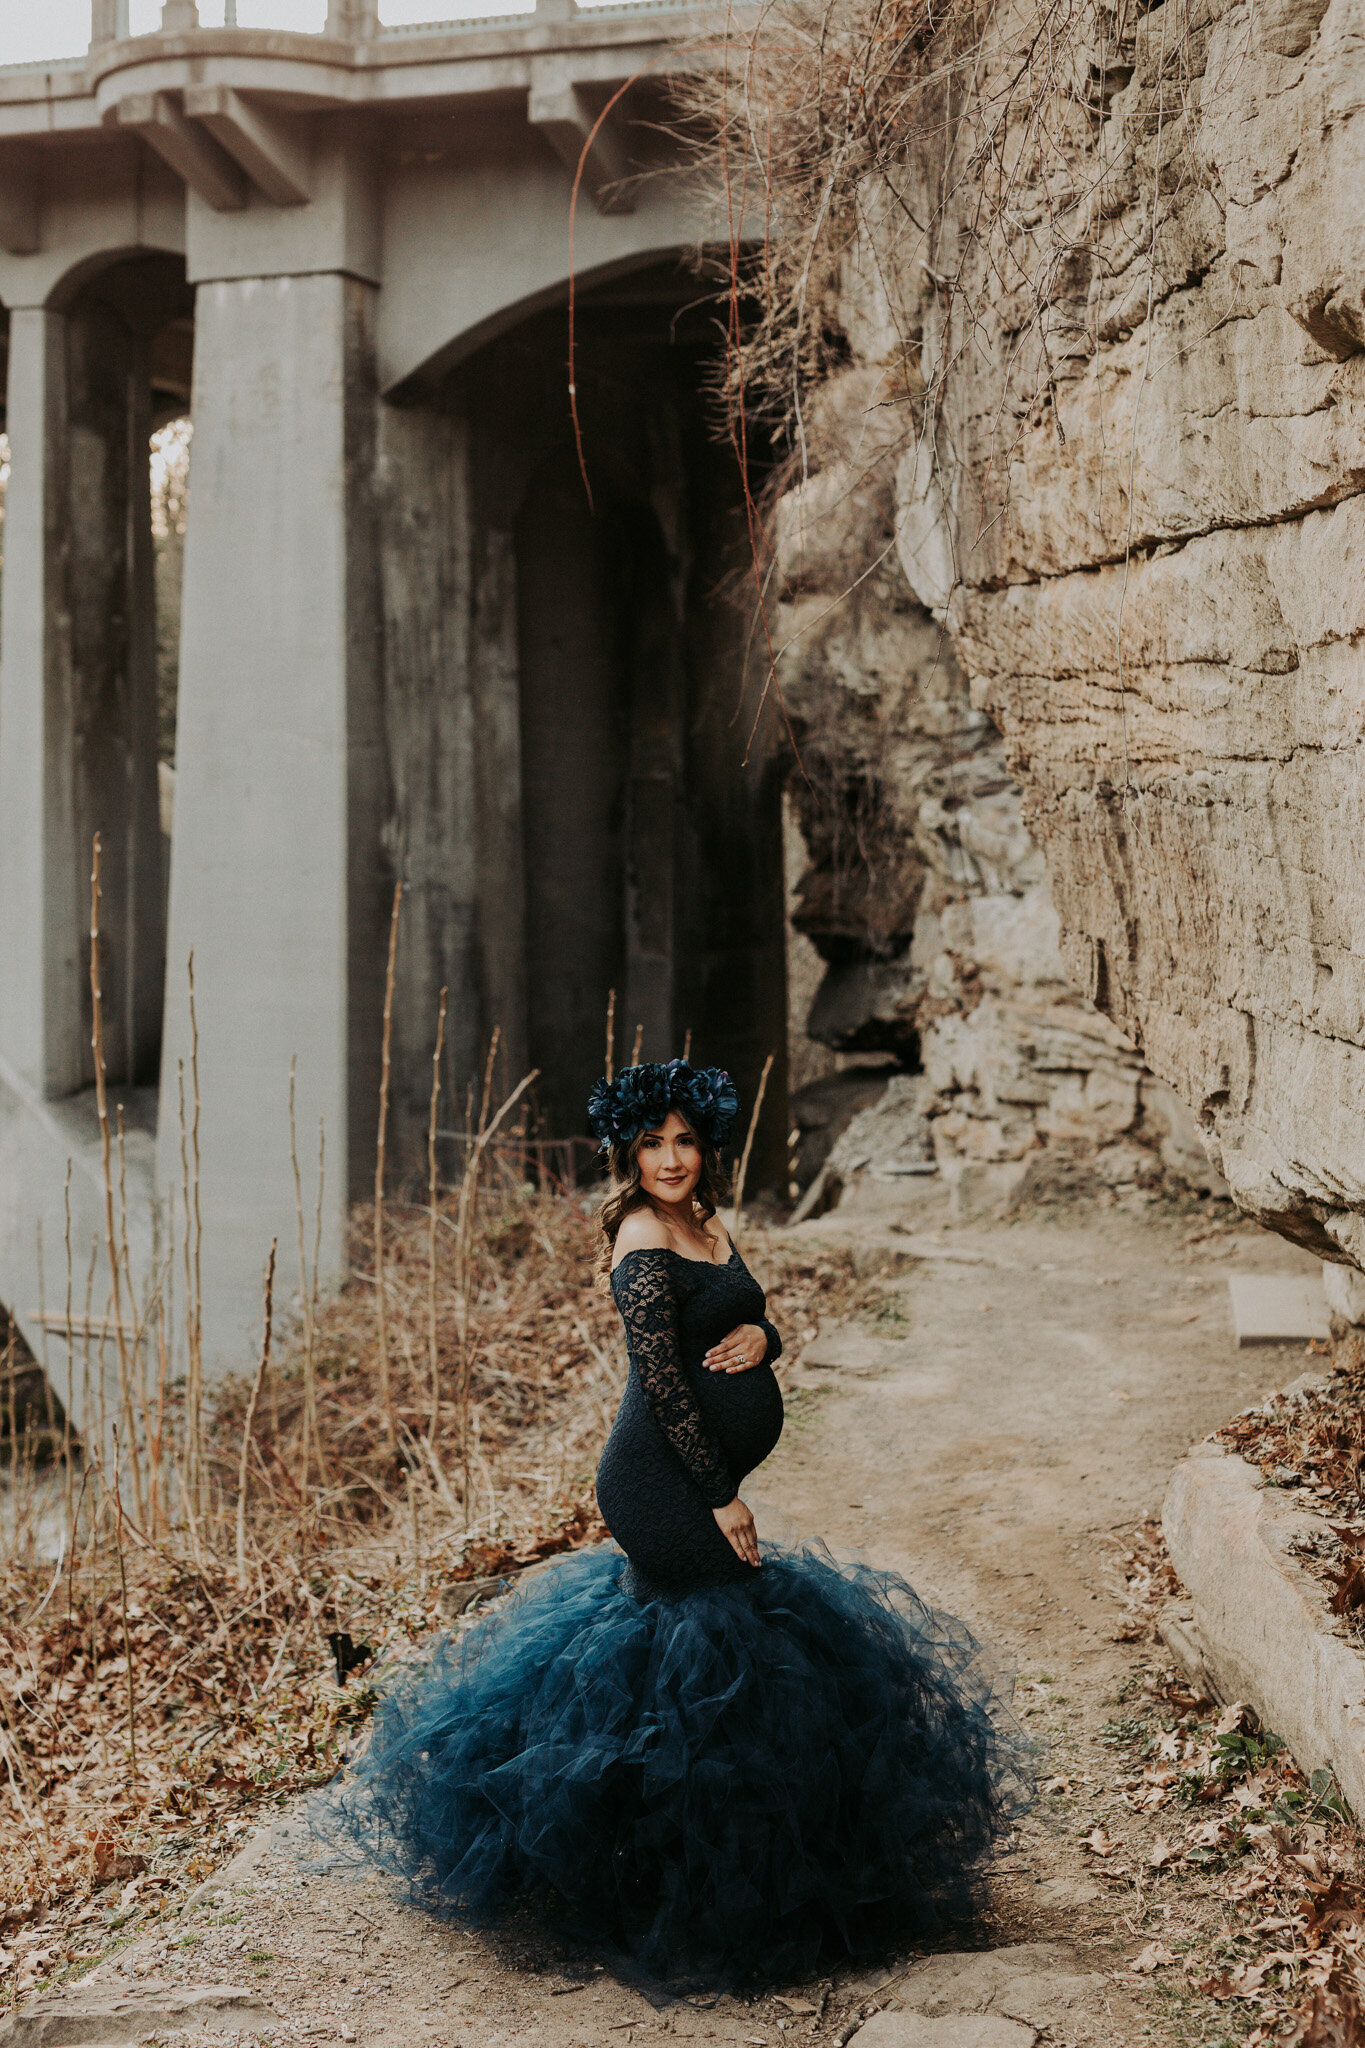 Blue_Tulle_Materntiy_Dress_Fashion_Lace_Baby_Boy_Mom_to_Be_Mill_Creek_Park_Lantermand_Mill_Spring_2021_by_Newbron_Photographer_Christie_Leigh_Photo_Mahoning_COunty_Ohio_OH-2.jpg